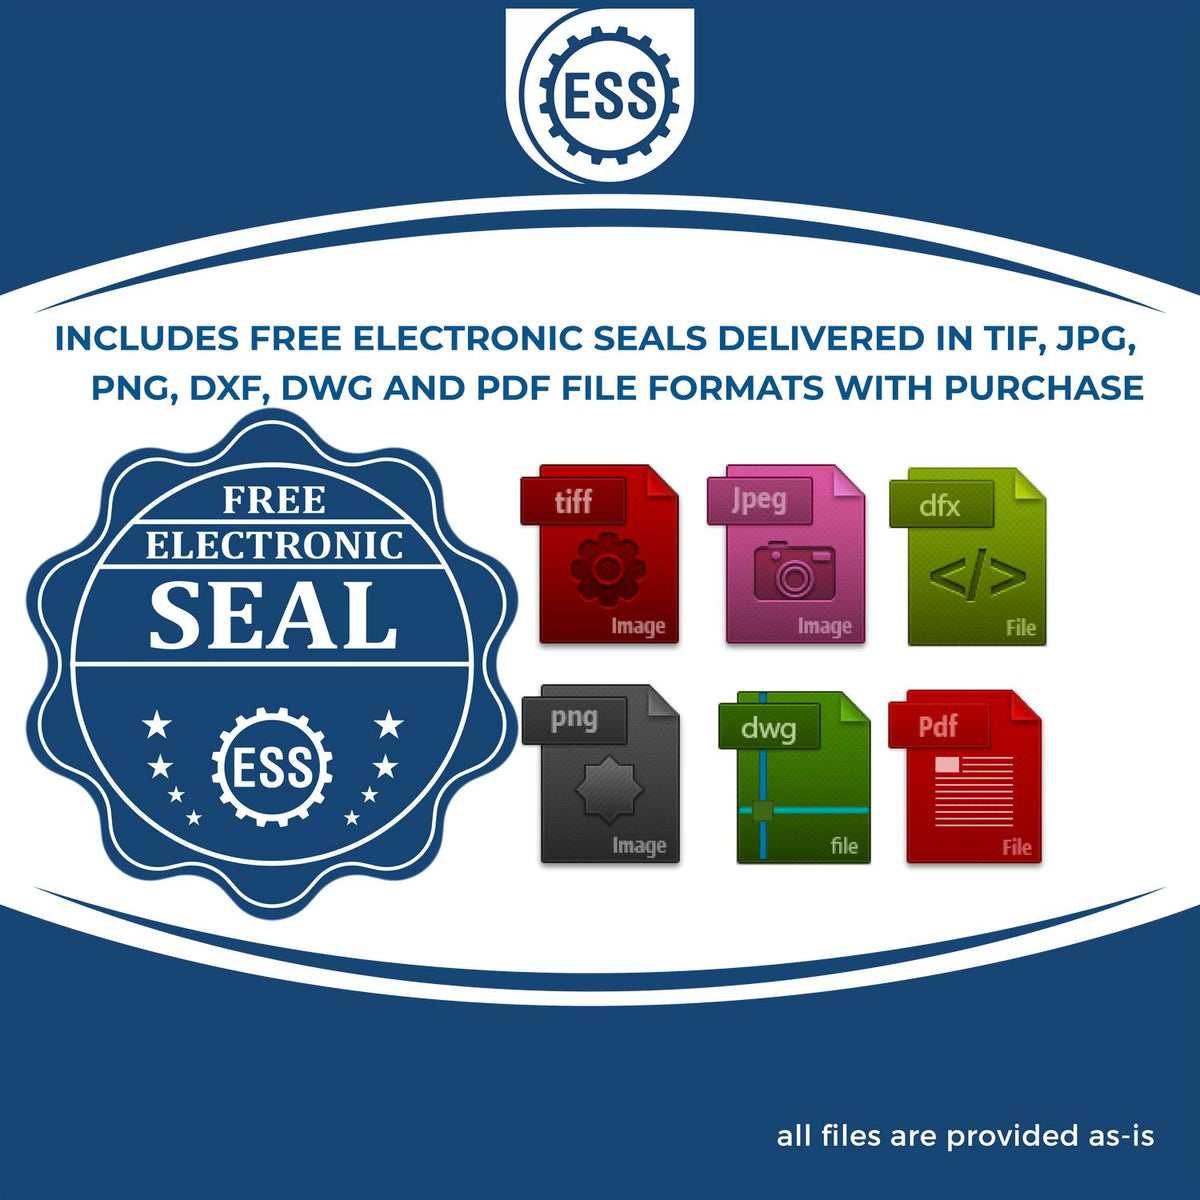 An infographic for the free electronic seal for the West Virginia Professional Geologist Seal Stamp illustrating the different file type icons such as DXF, DWG, TIF, JPG and PNG.